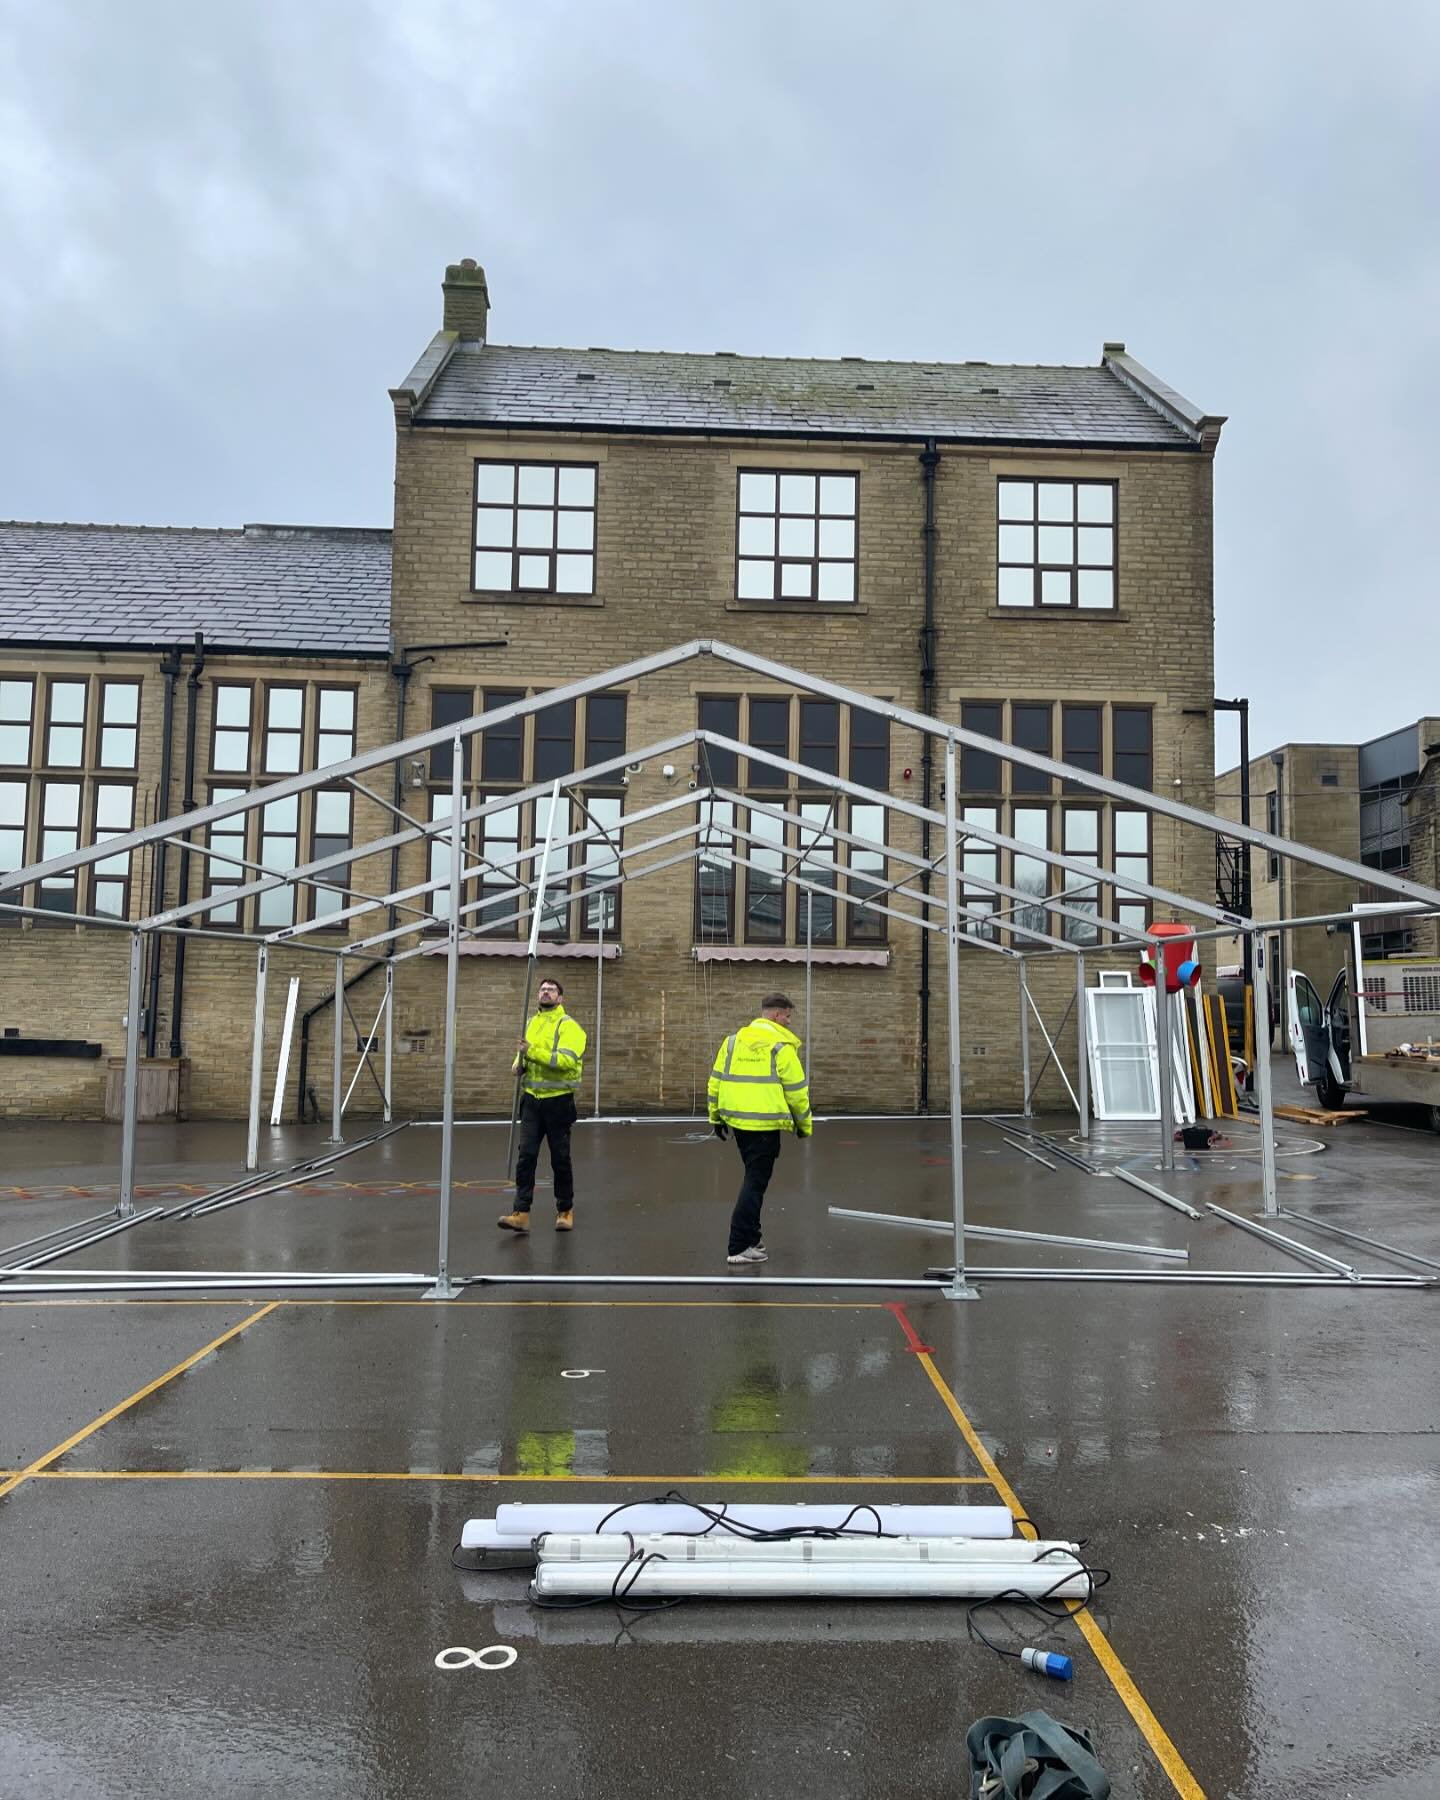 The team have been busy this week installing several marquees newly manufactured and purchased by local education authorities.